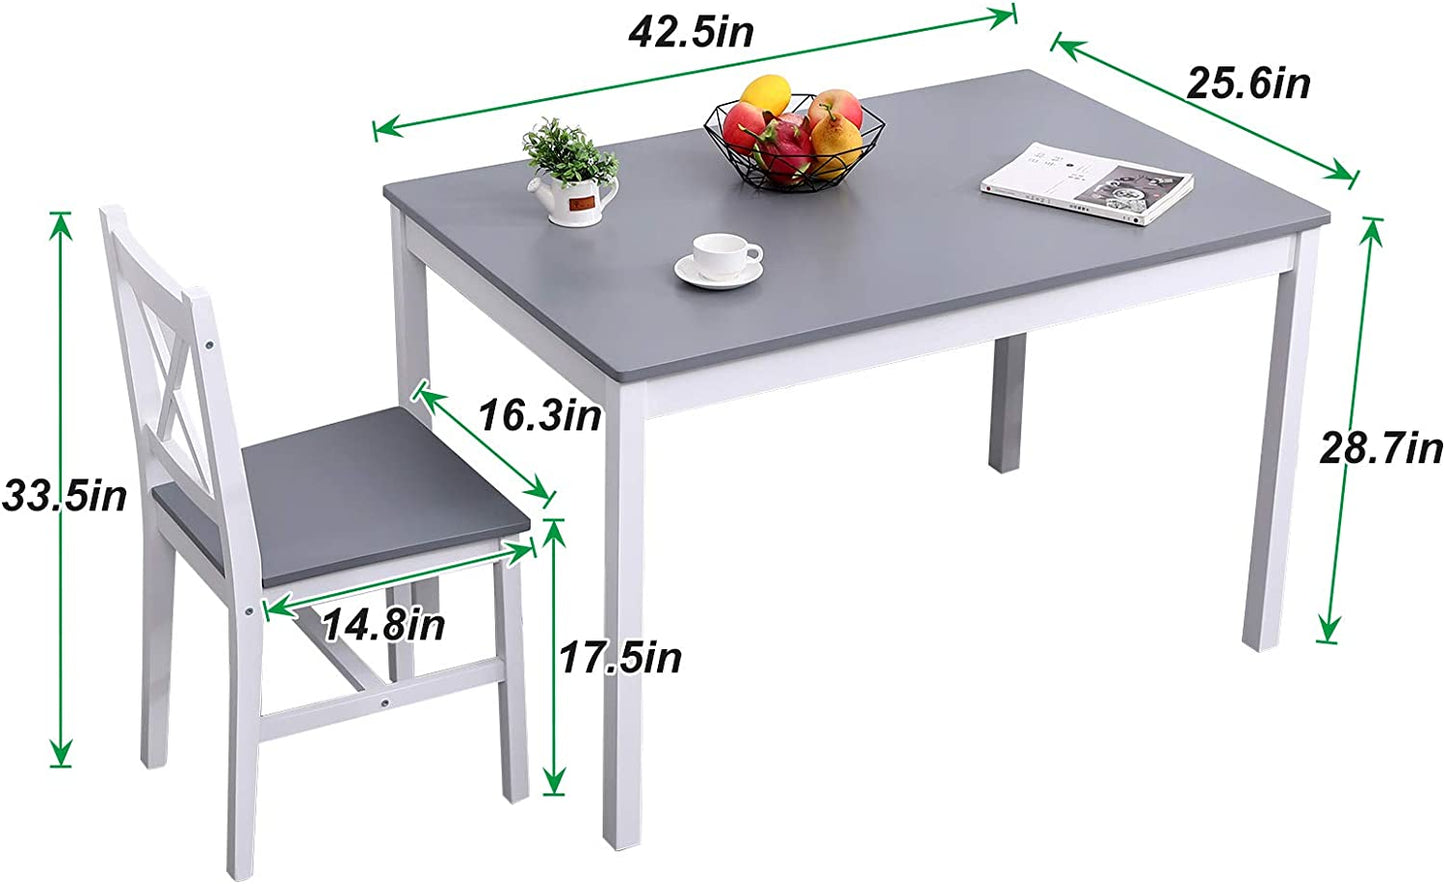 SogesHome 5 Pieces Dining Table Set for 4 Persons, Wood Kitchen Table Set with 4 Chairs, Gray-White